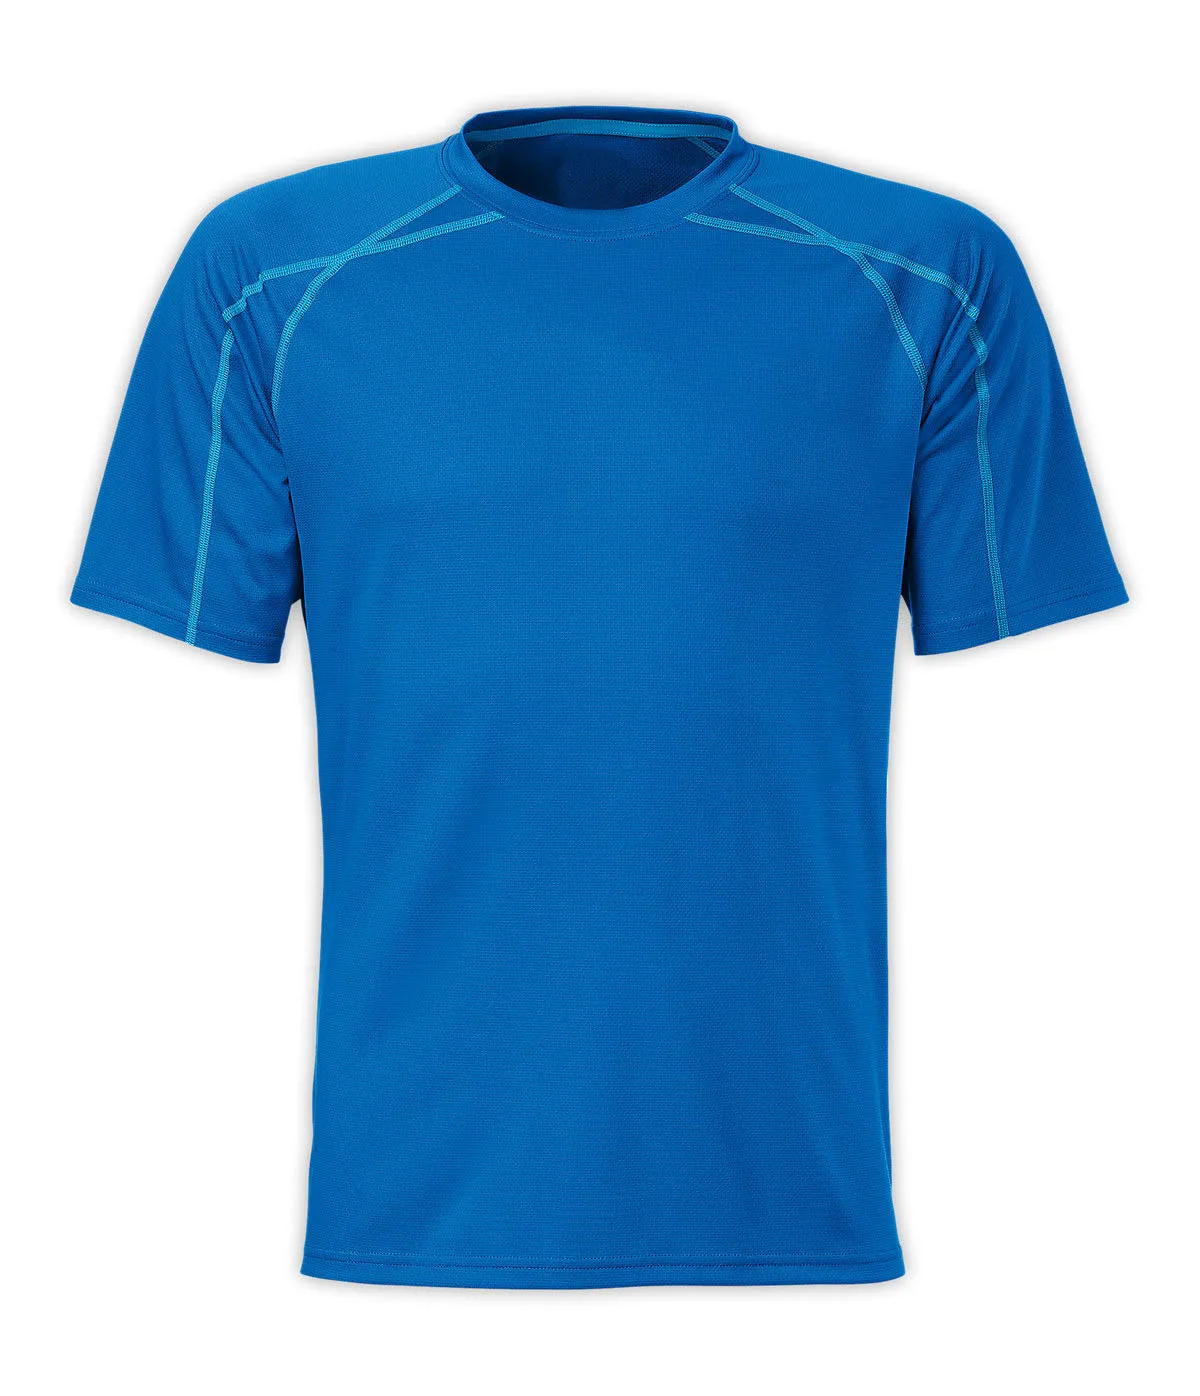 Wholesale 100% Polyester Sport T Shirts - Buy T Shirts,100% Polyester ...